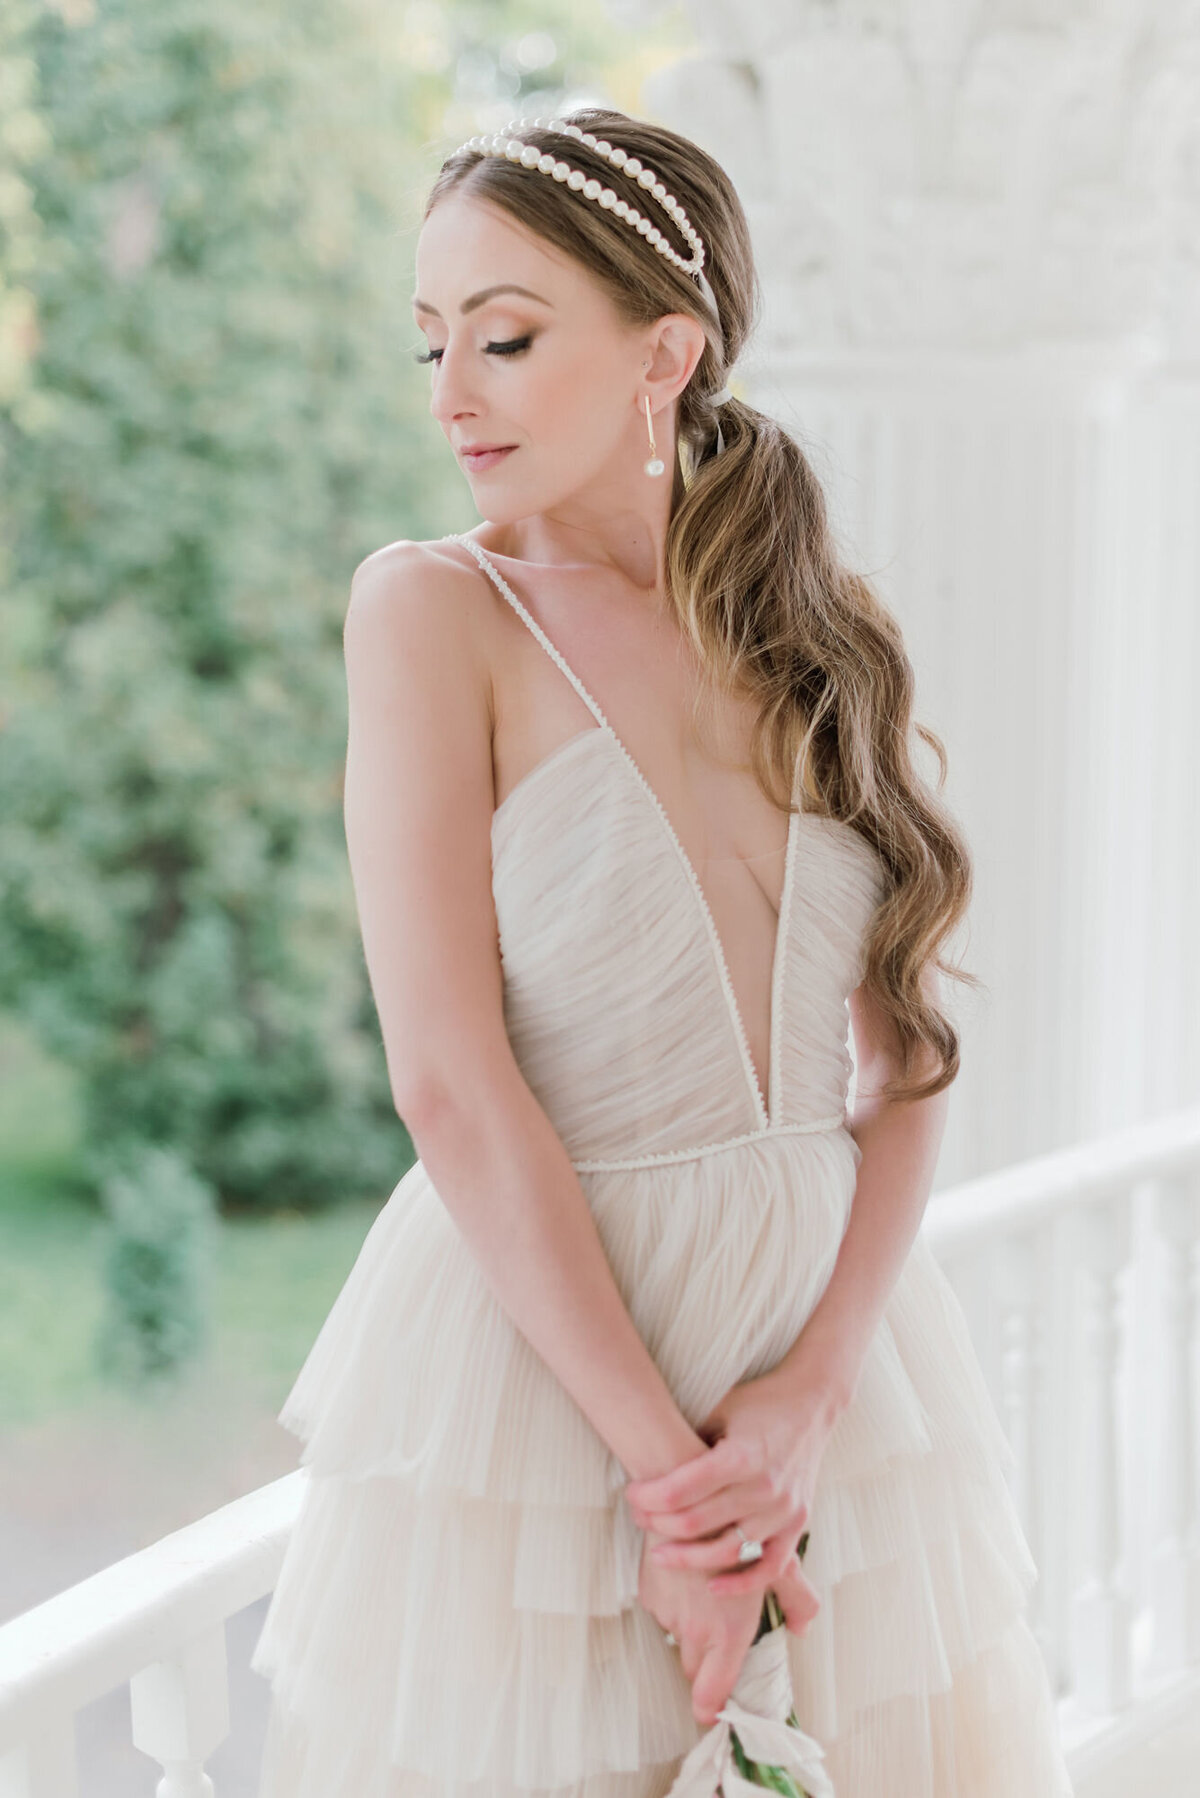 Stunning romantic bridal hair and makeup by Bellamore Beauty, feminine Calgary hair and makeup artist, featured on the Brontë Bride Vendor Guide.